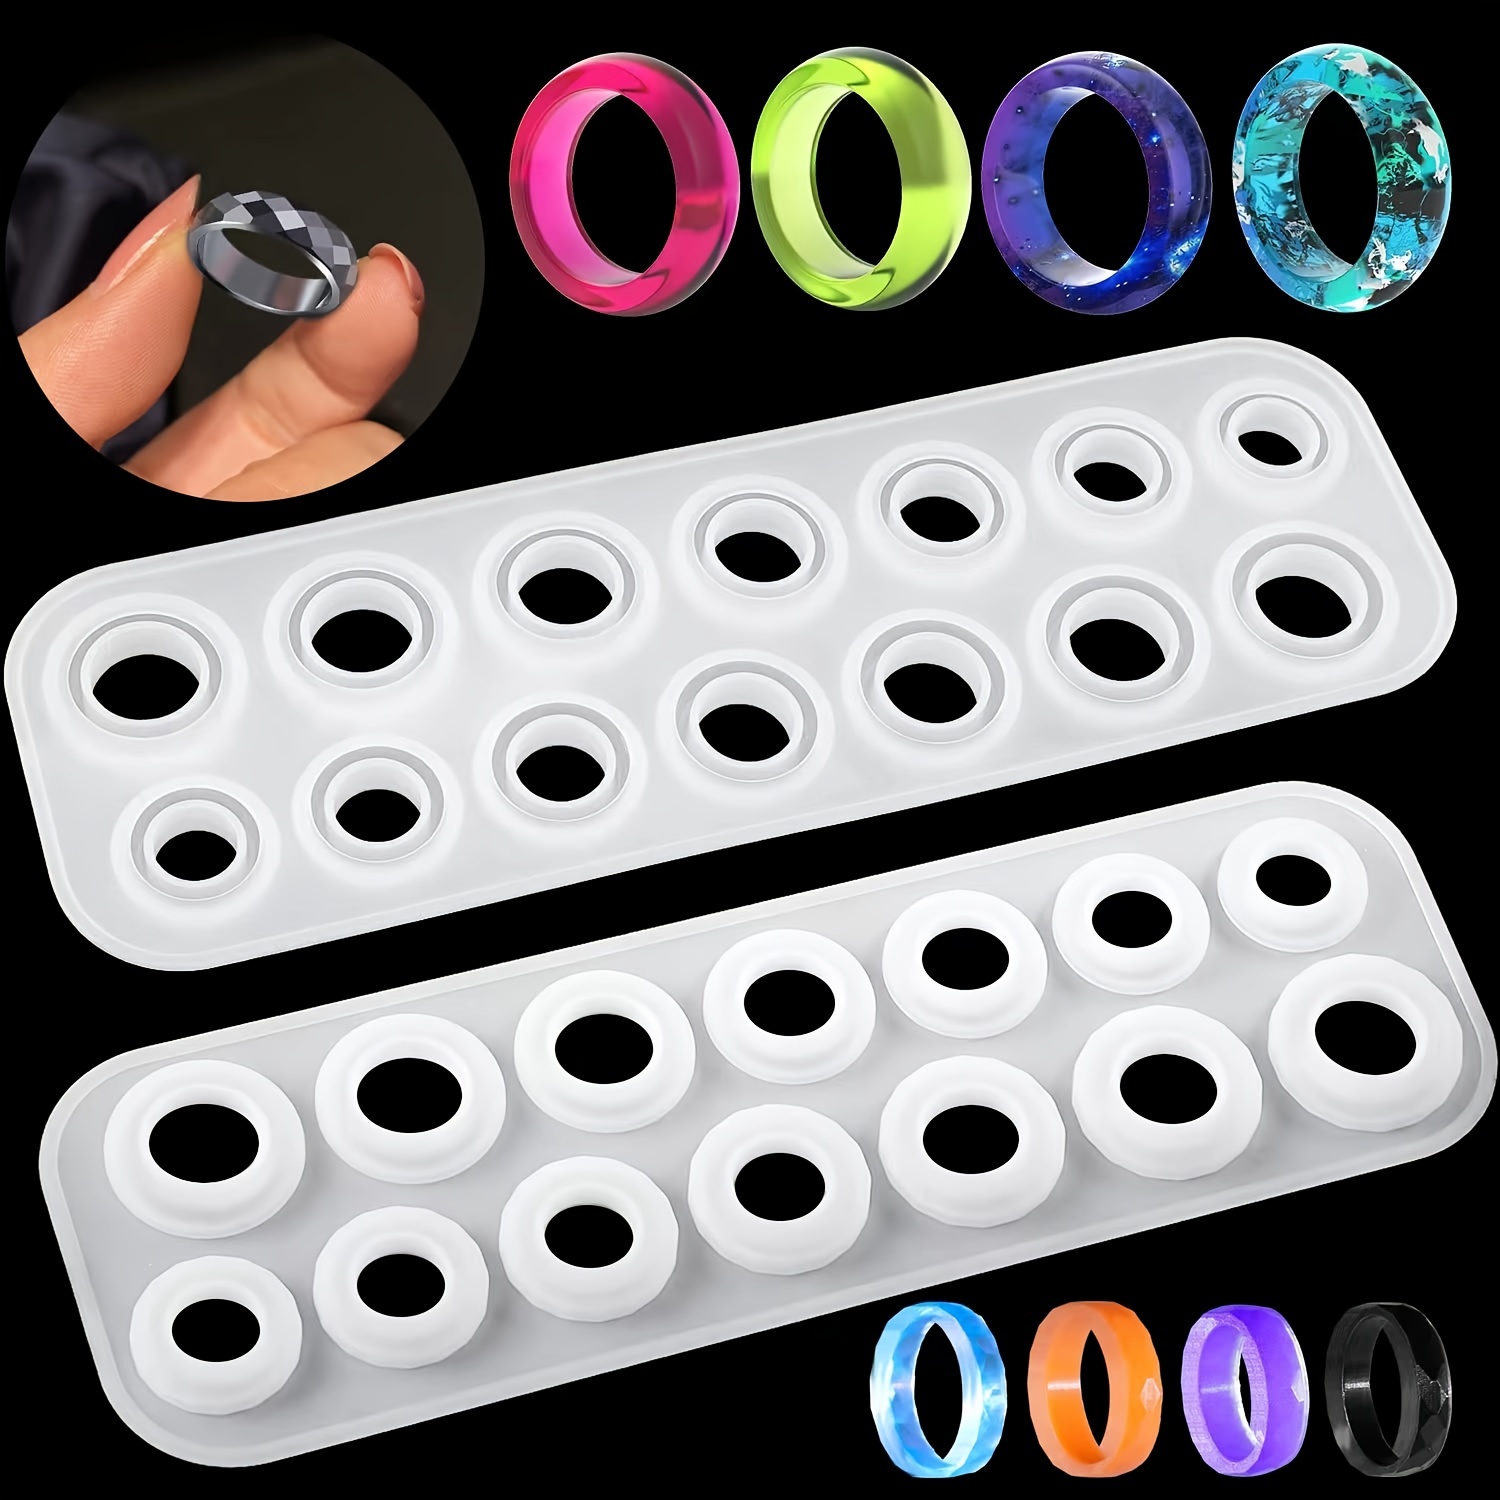 Knuckle Dusters Silicone Mold for Resin Craft (4 Cavity) DIY Resin Mould  Silicone Mold for Resin - Silicone Molds Wholesale & Retail - Fondant, Soap,  Candy, DIY Cake Molds